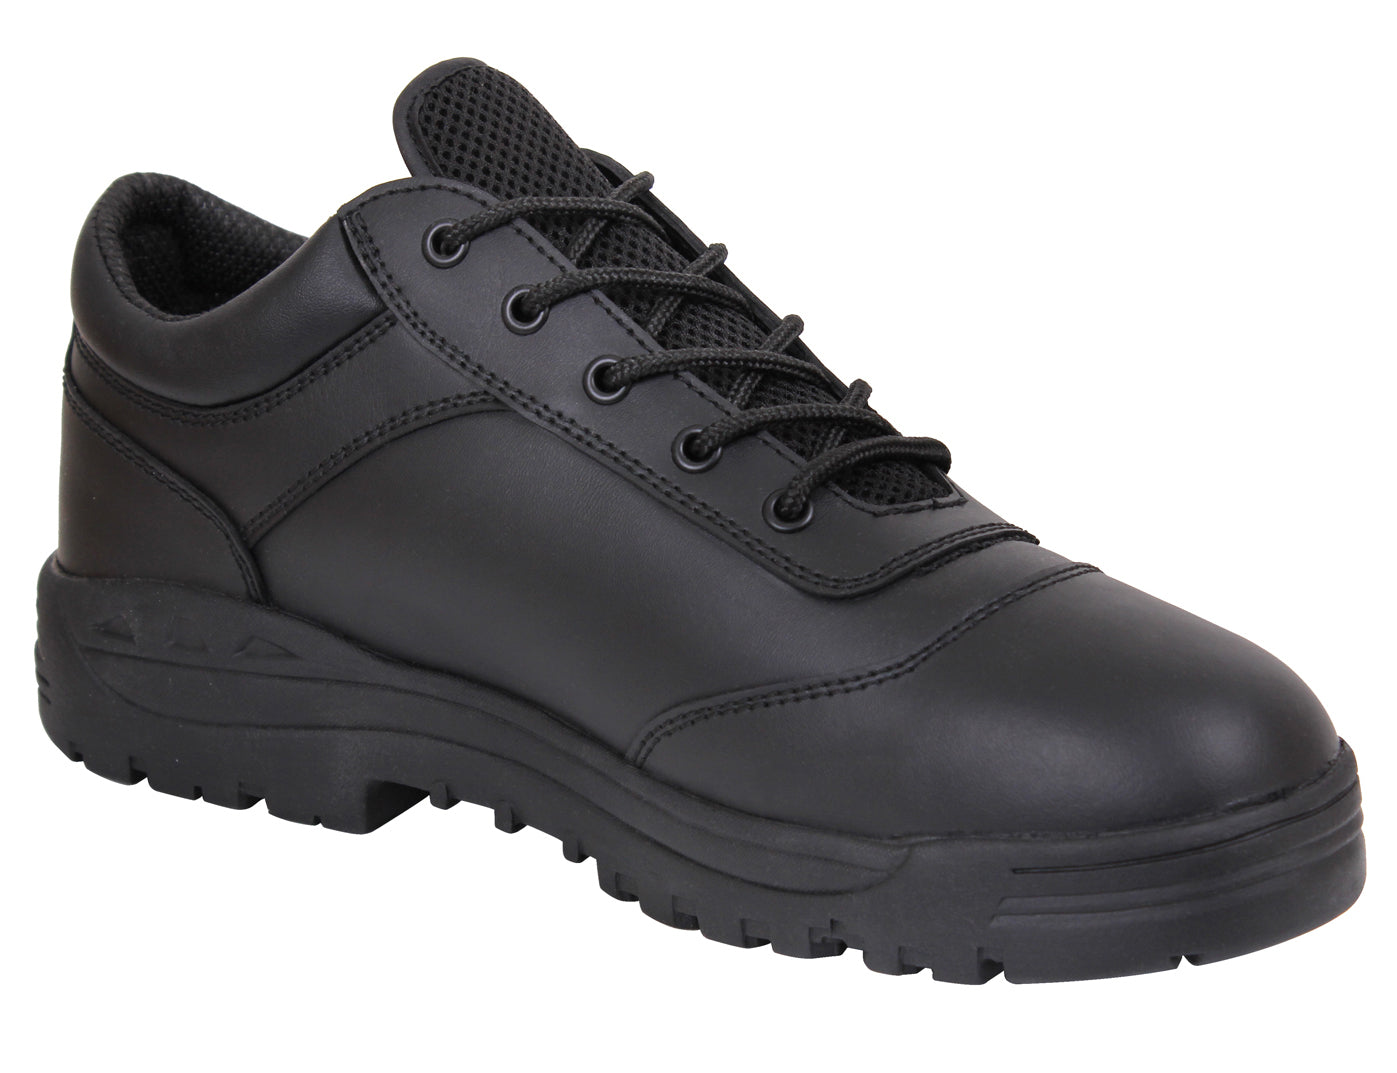 Rothco Men's Black Tactical Utility Oxford Shoe/Work Boots Regular or Wide Width